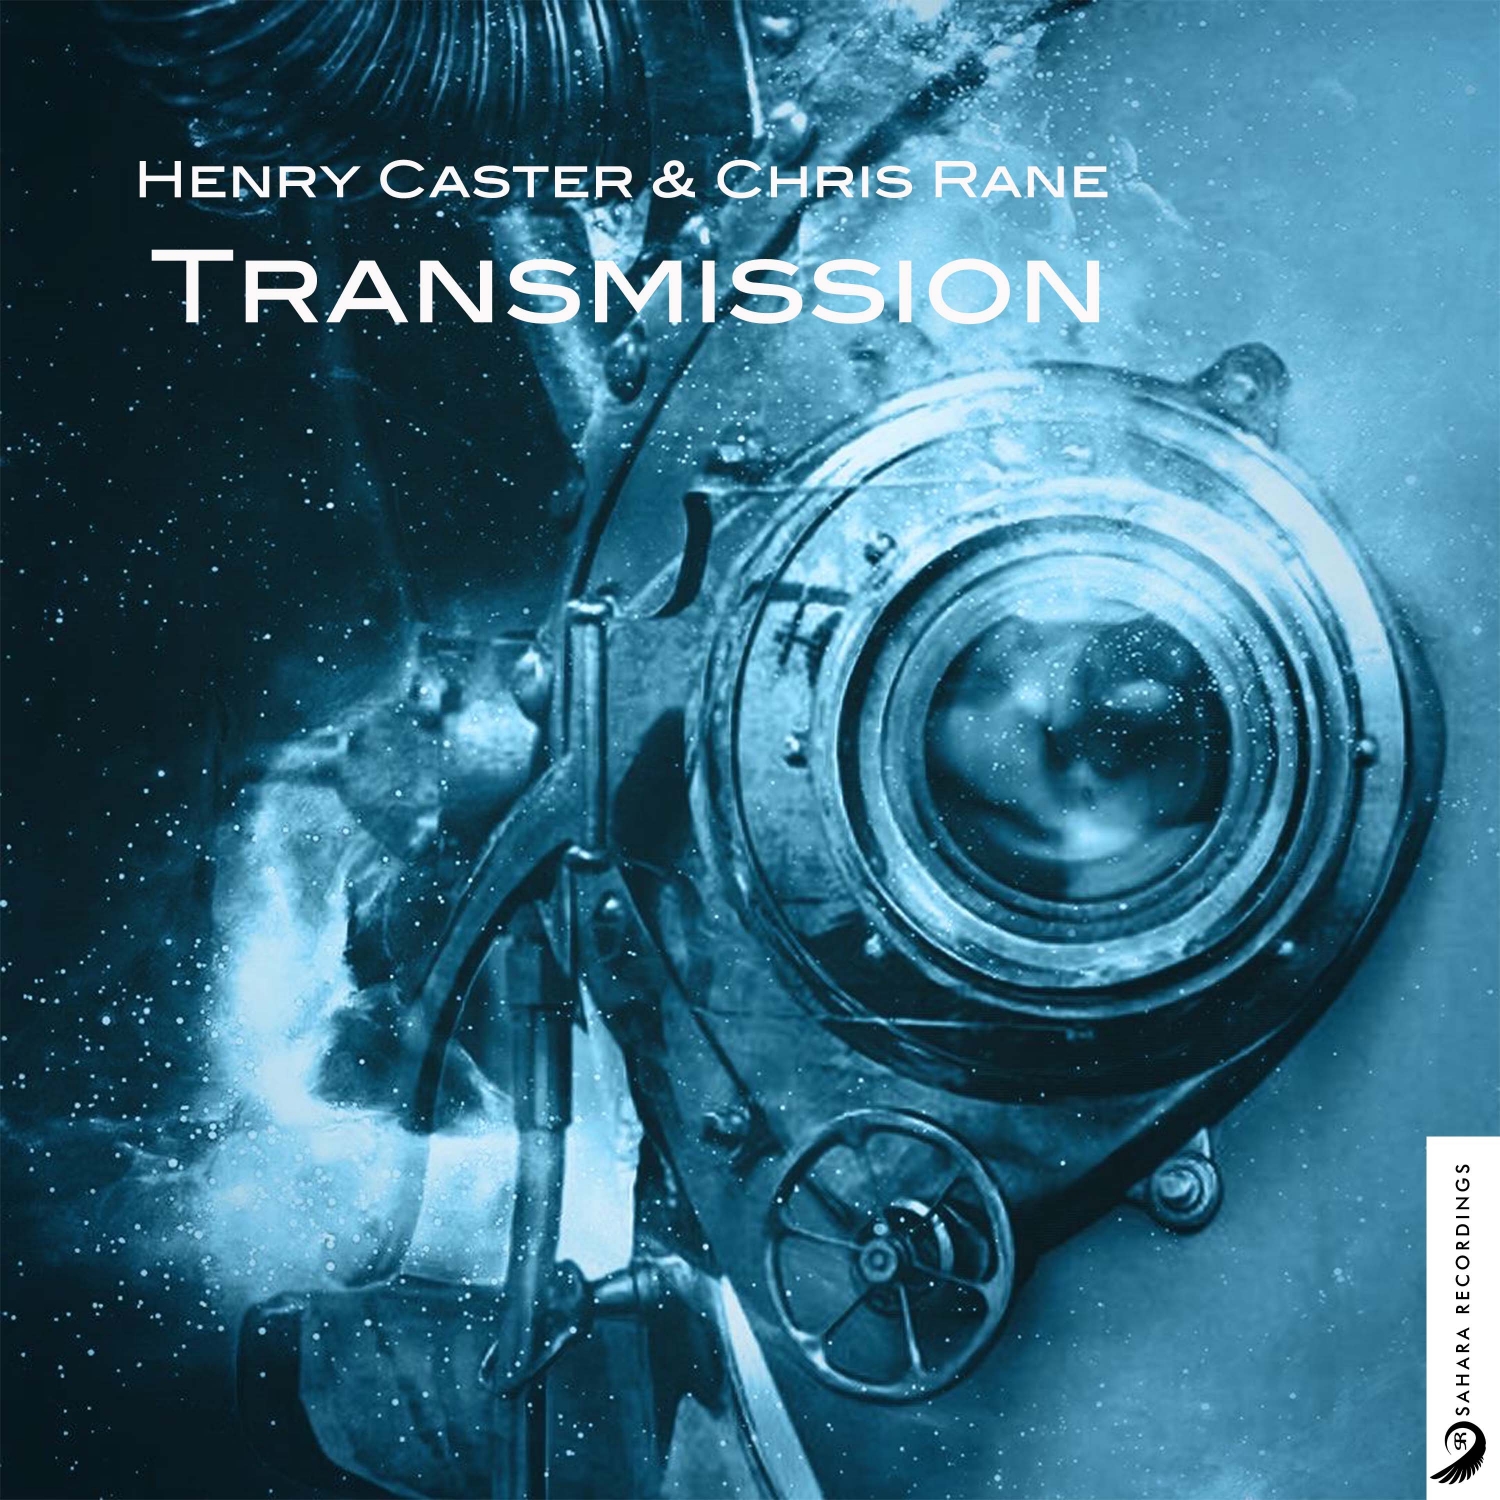 Henry Caster and Chris Rane presents Transmission on Sahara Recordings